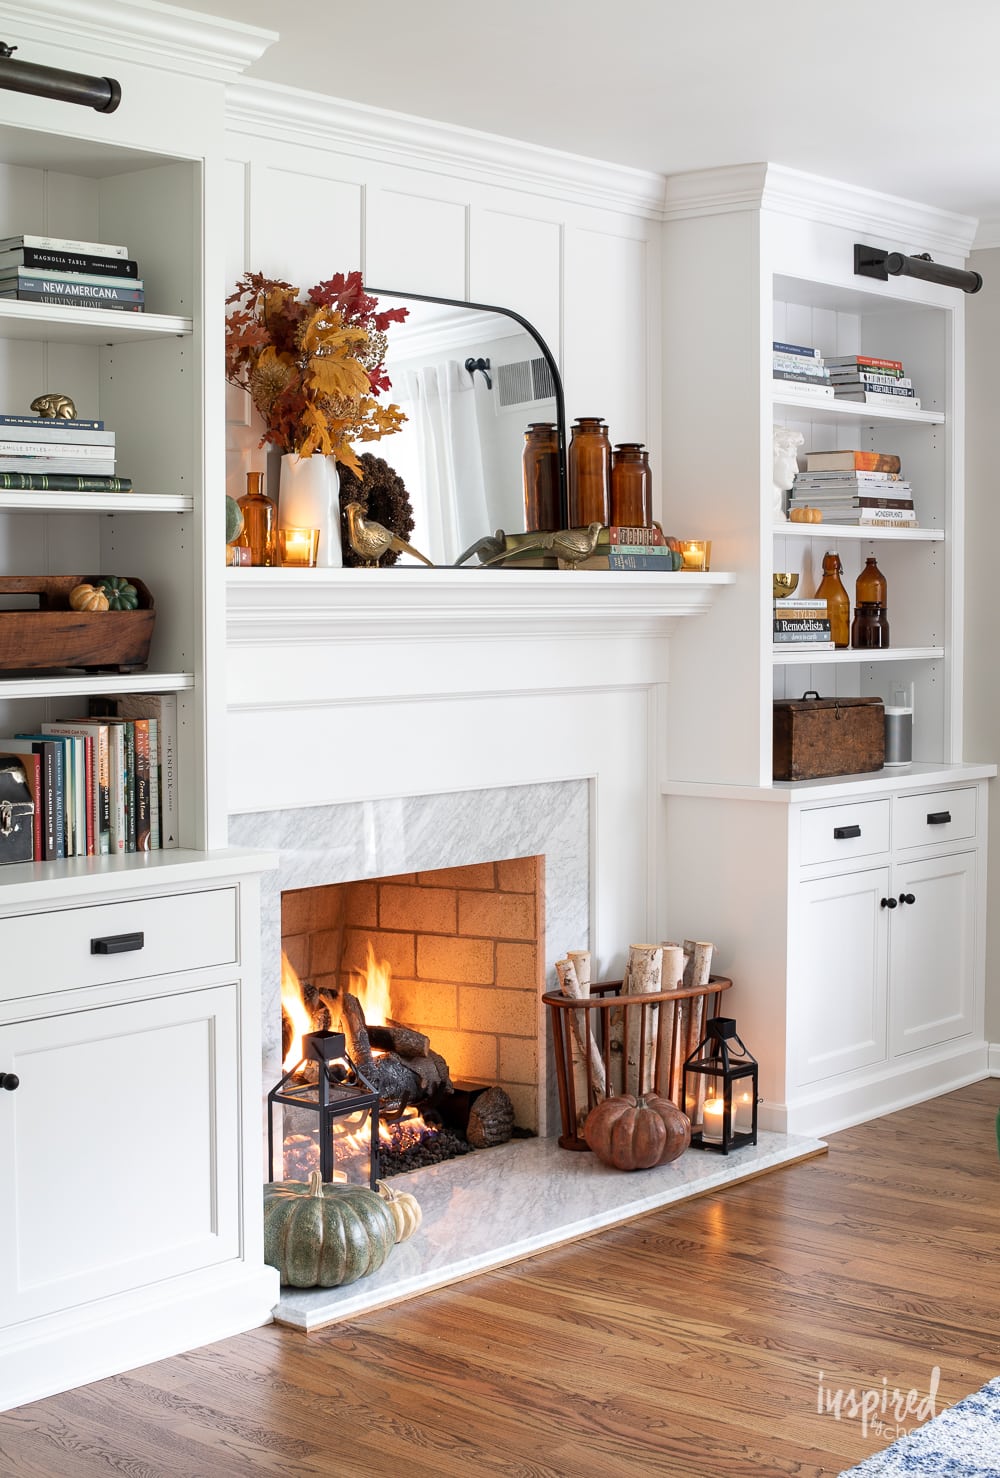 Discover beautiful fall mantle decor ideas to create an inviting and cozy ambiance. From autumn garlands to Thanksgiving mantel decor, find inspiration here.